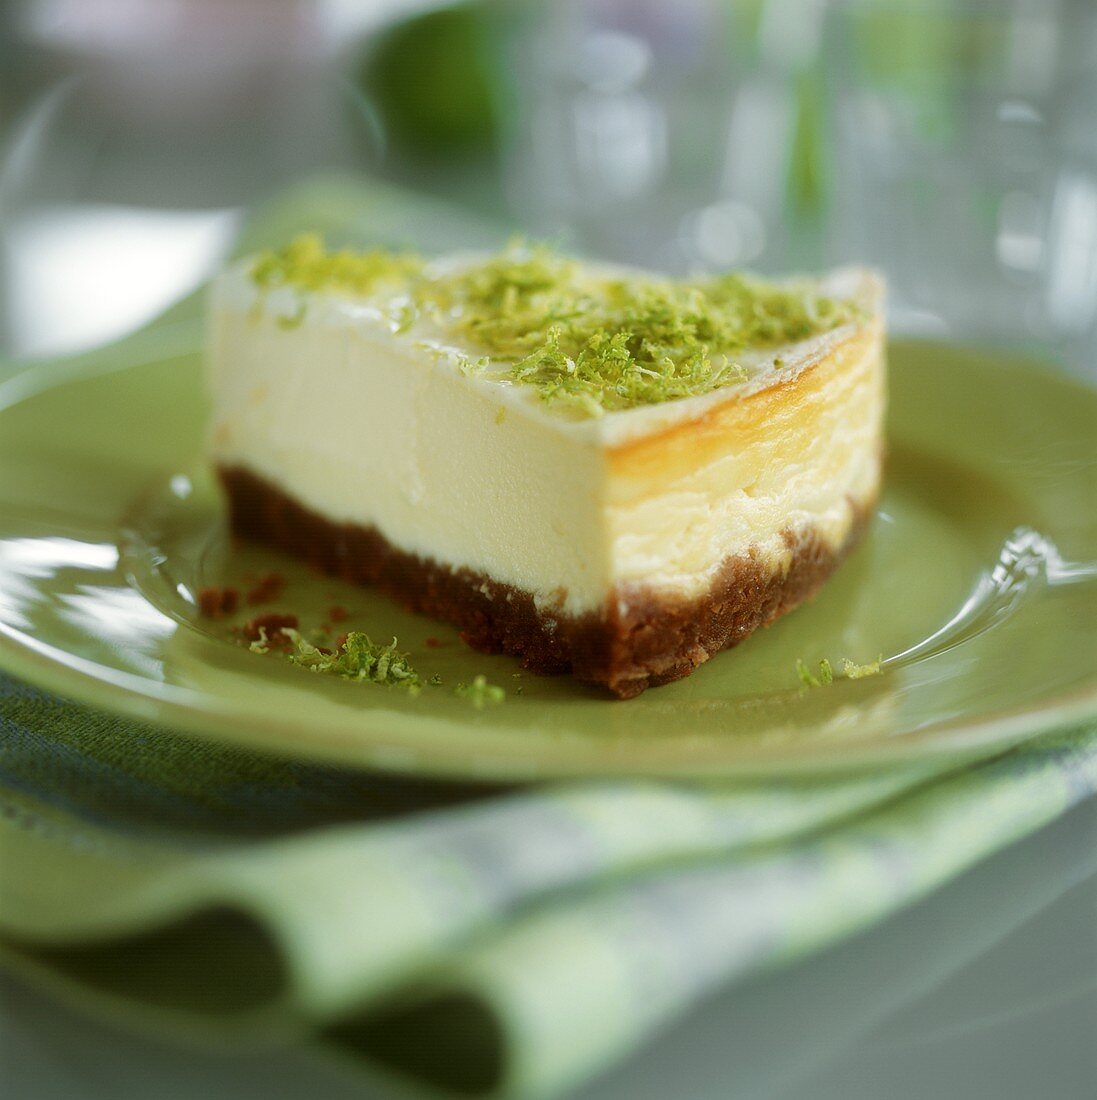 Piece of cheesecake with lime